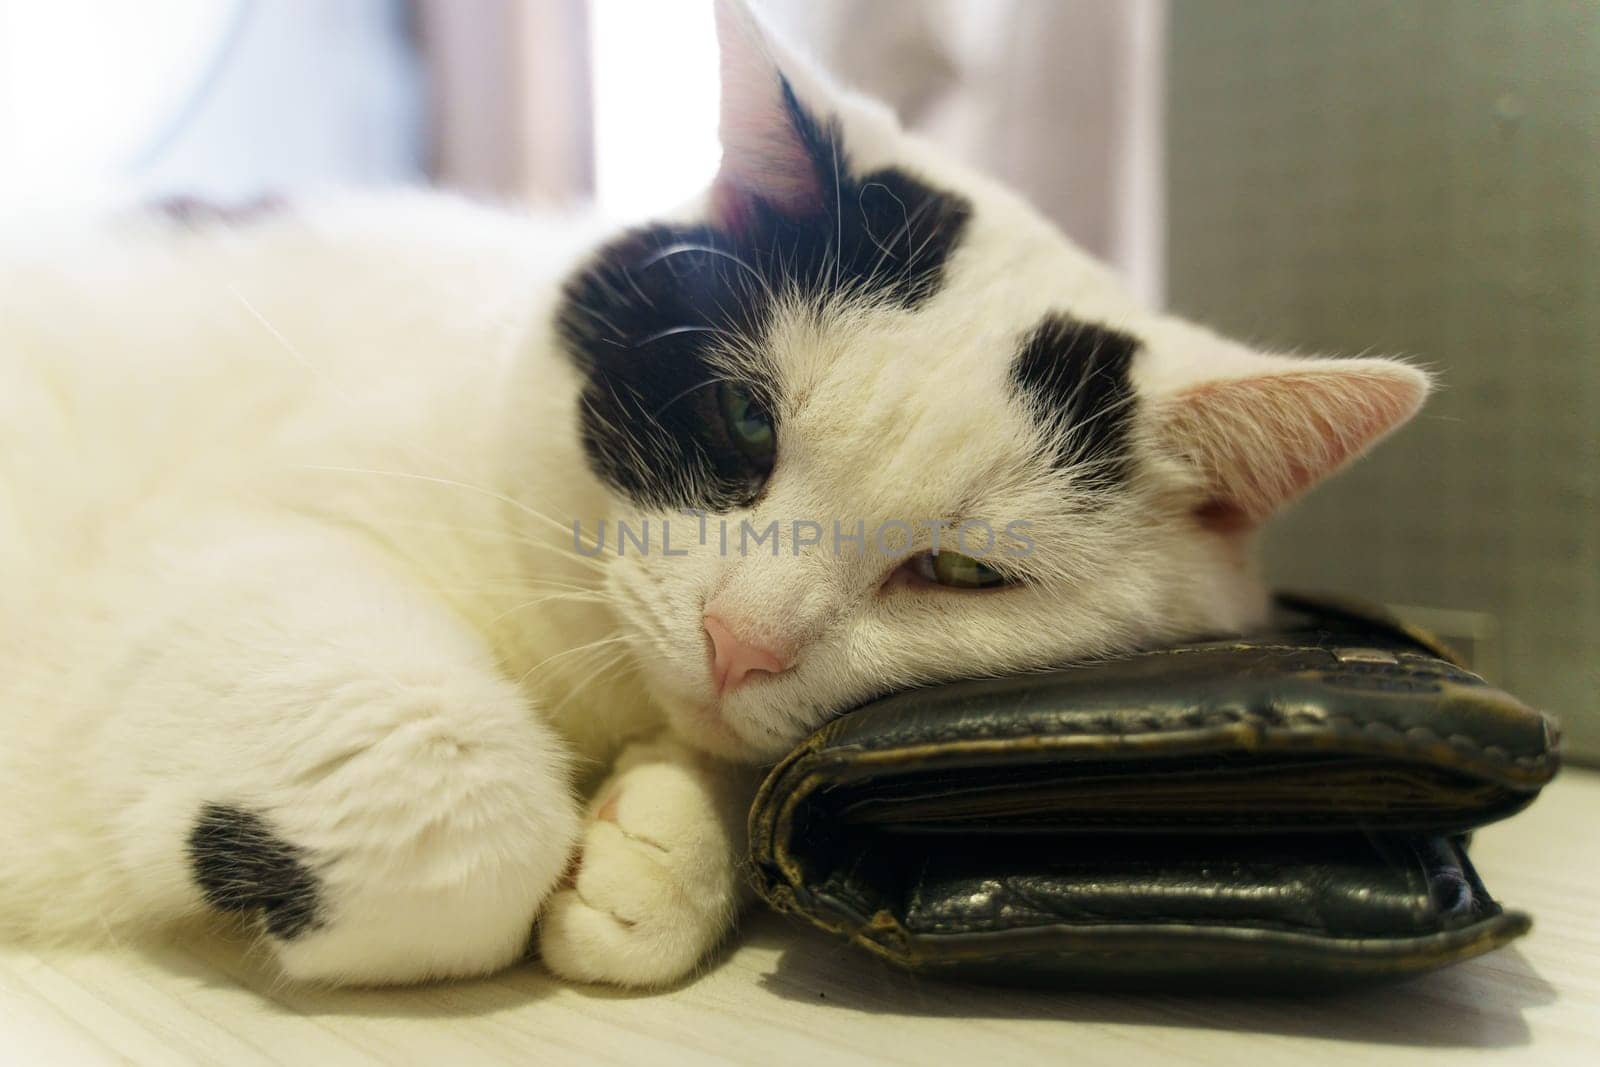 Black and White Cat Laying on Top of a Purse by Sd28DimoN_1976